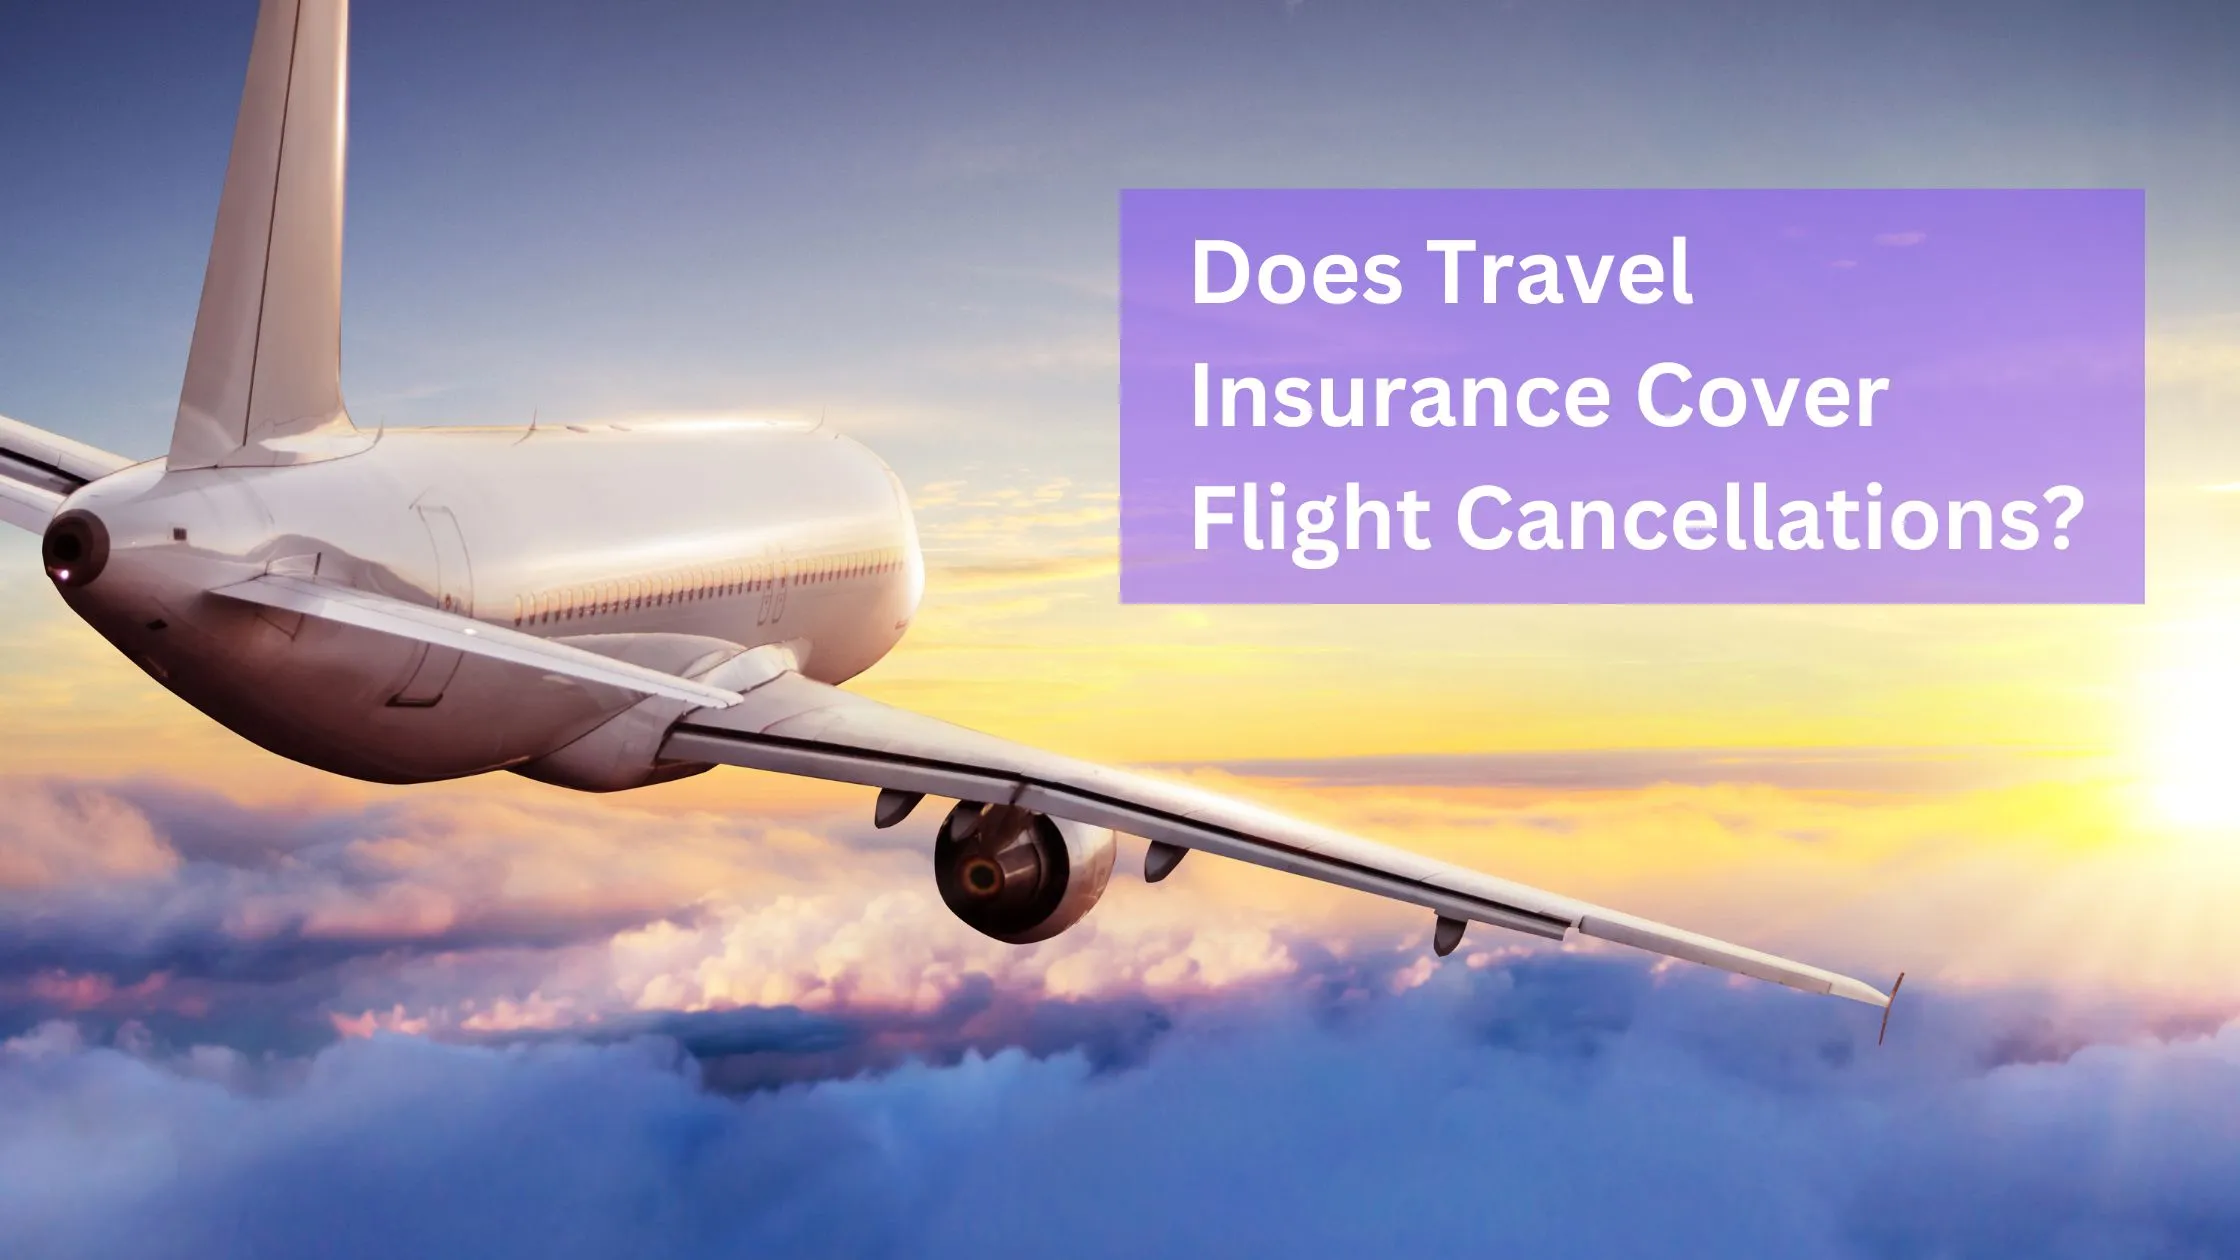 Does Travel Insurance Cover Flight Cancellations?